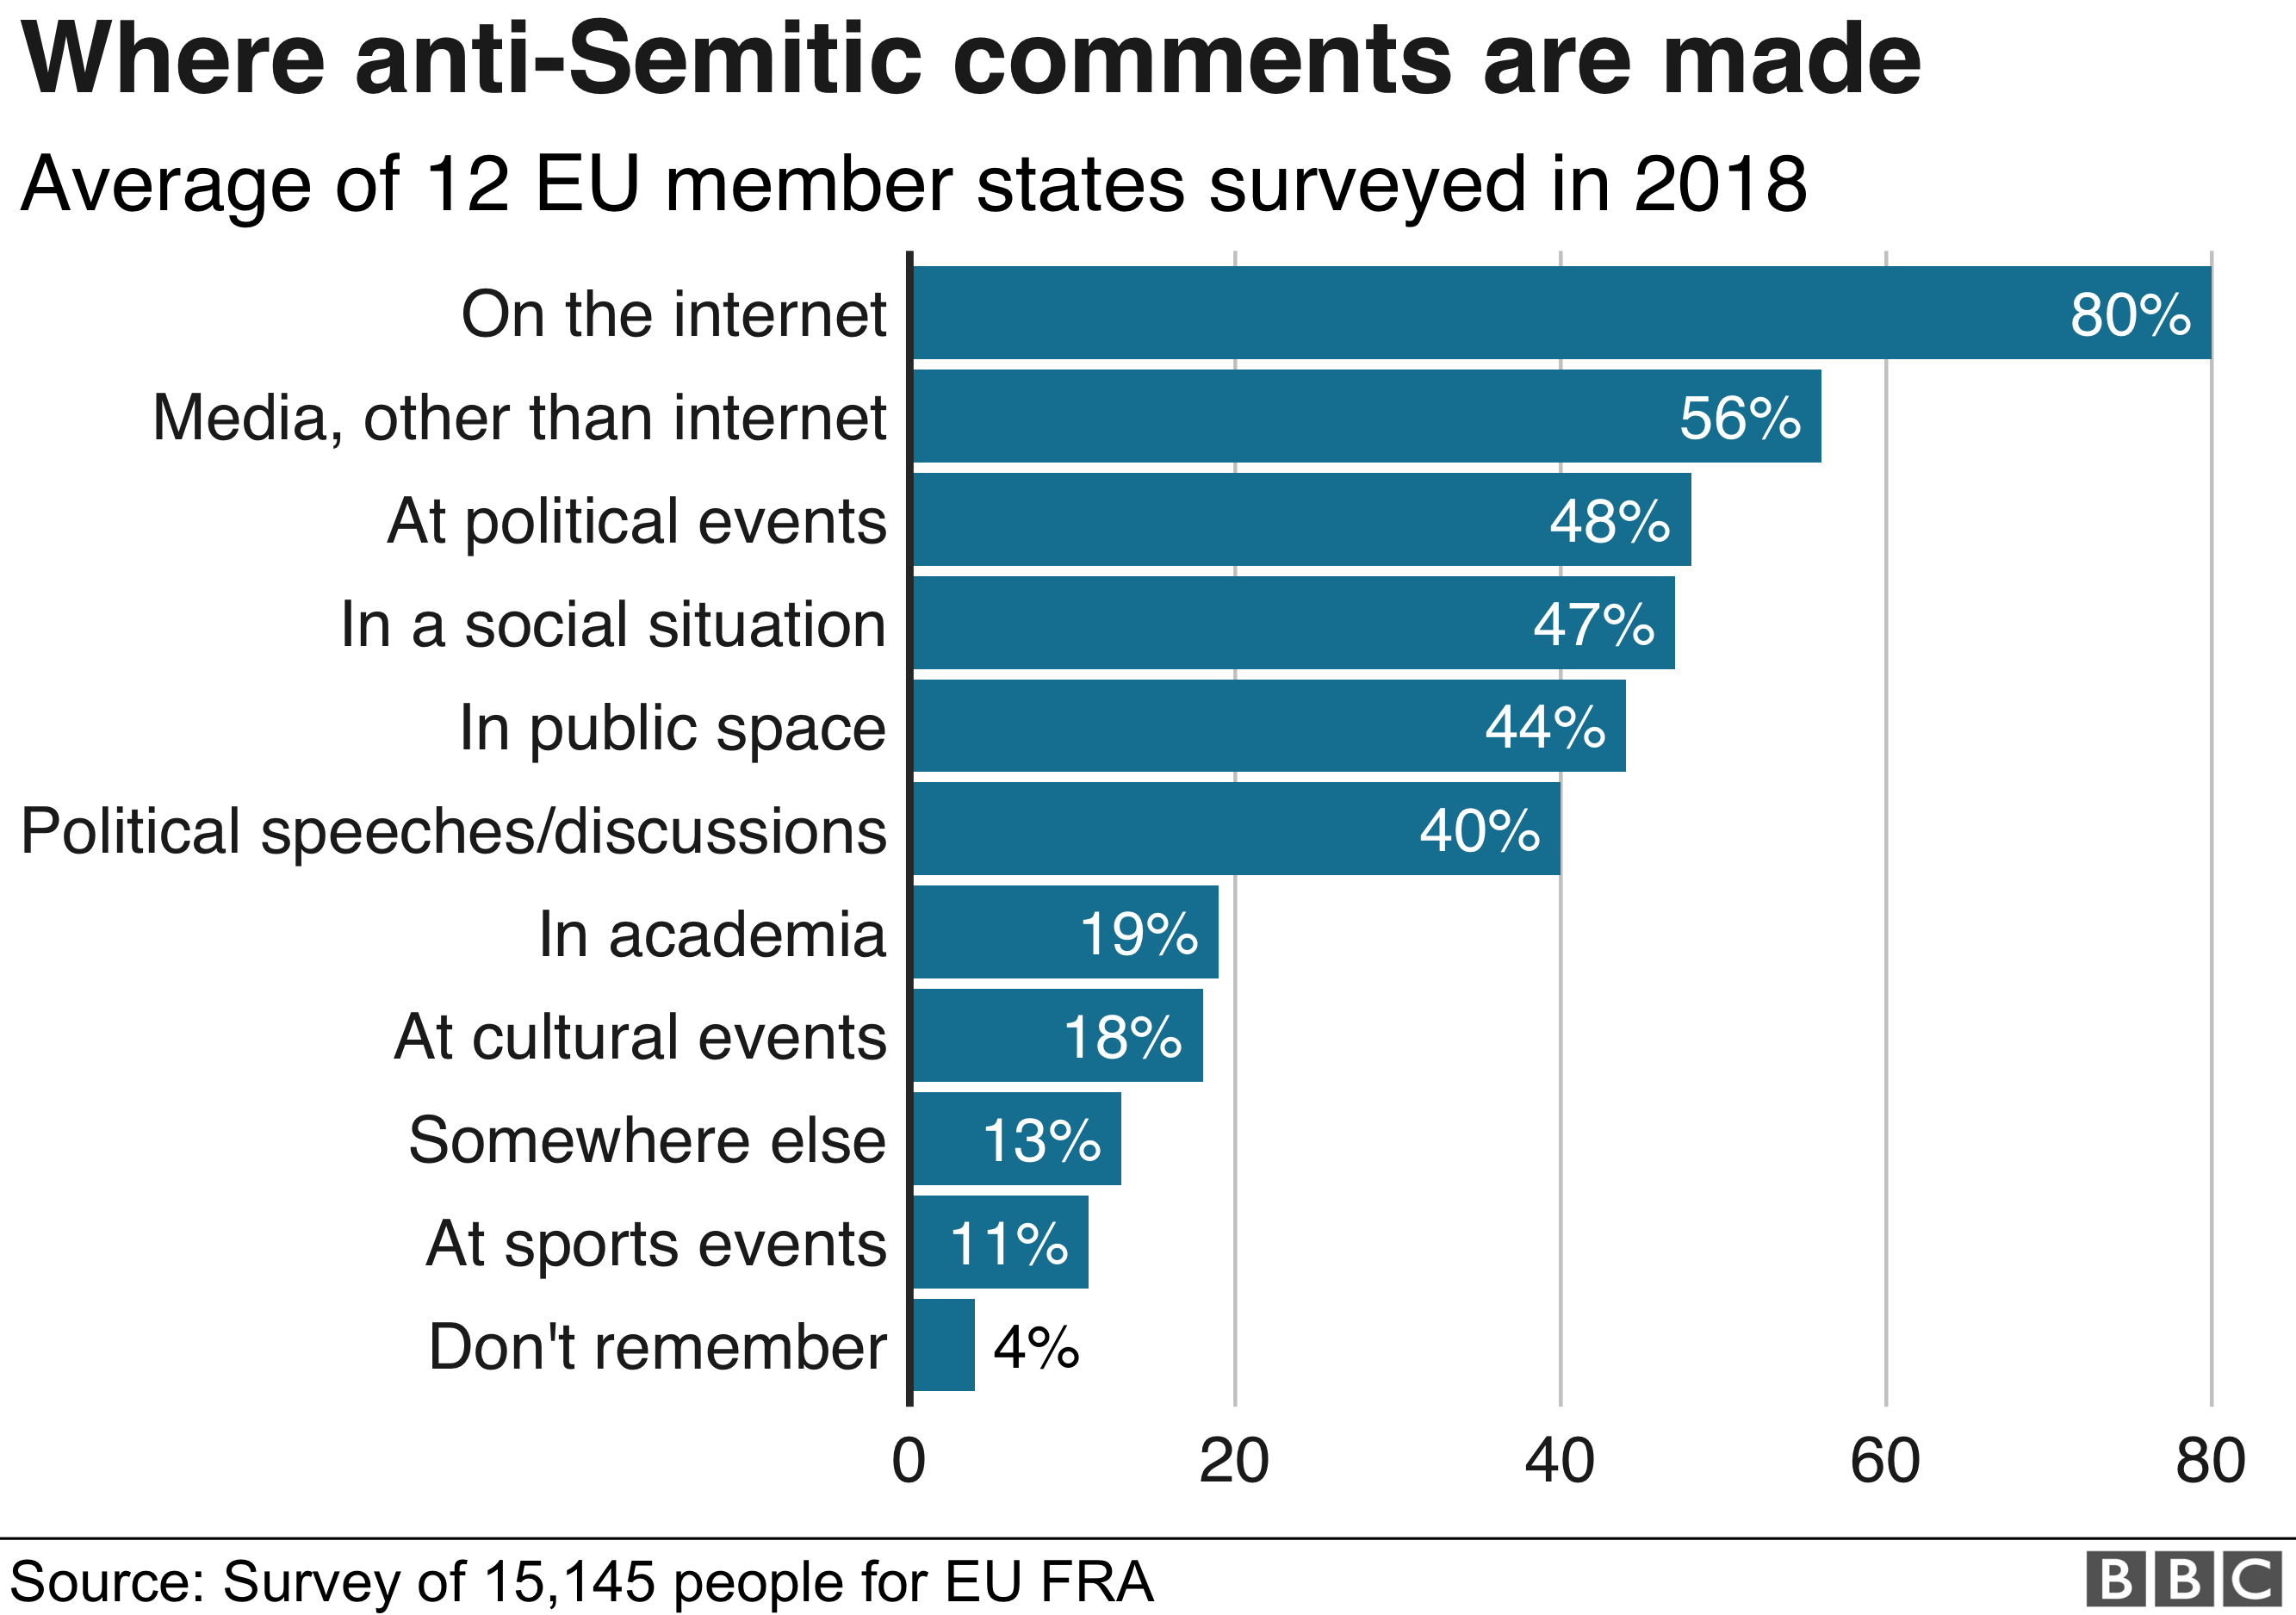 Graphic: Where anti-Semitic comments are made